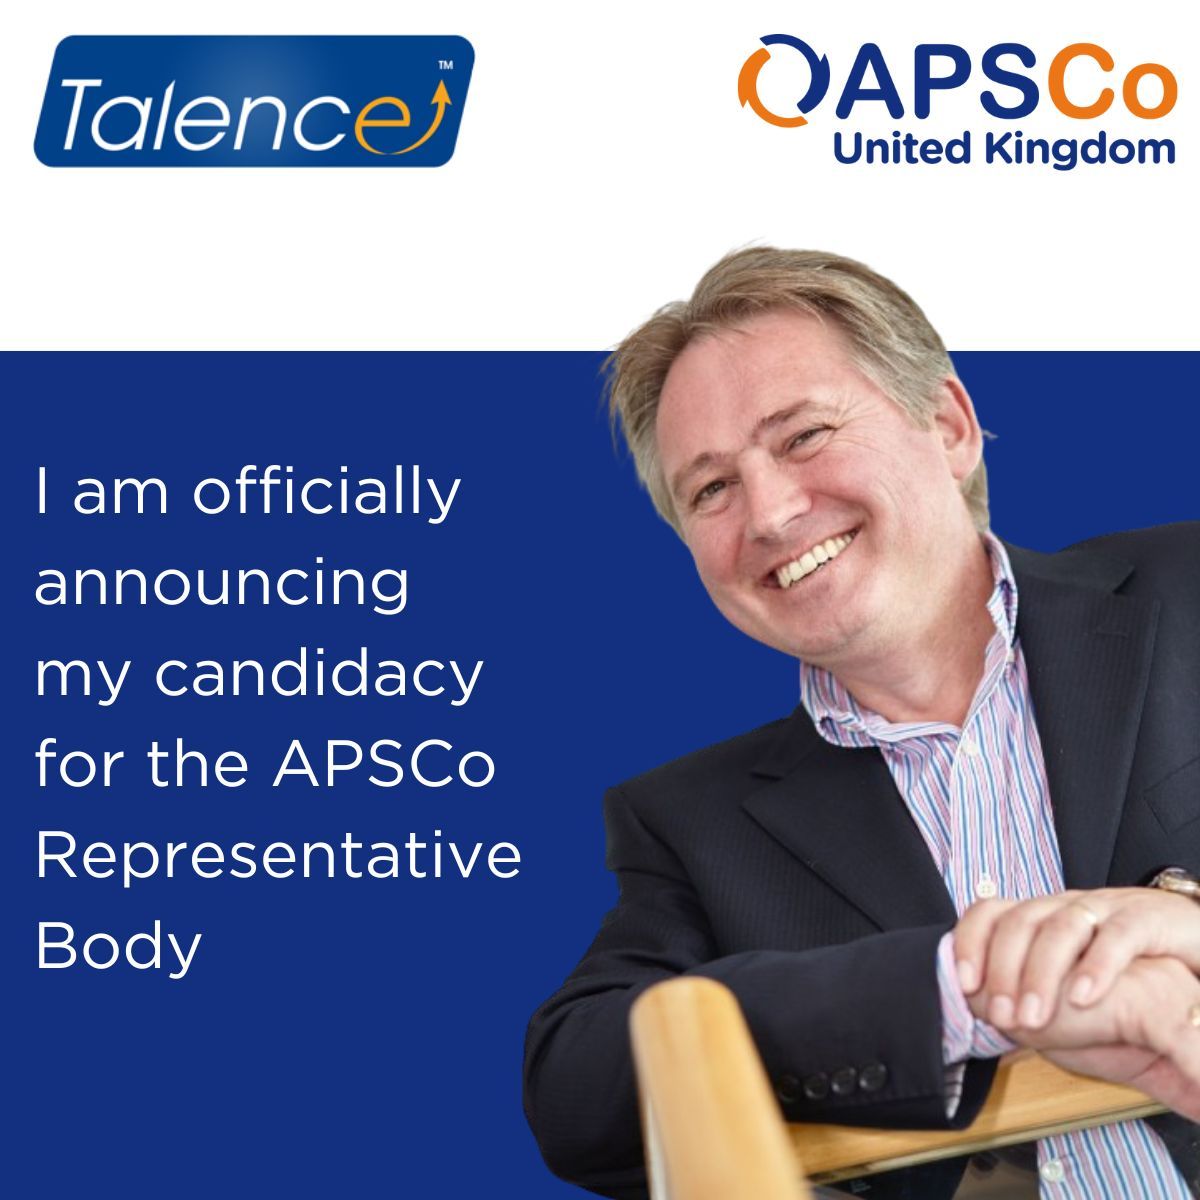 With 40 years in recruitment, including senior roles and #APSCo leadership, now a global coach and NED. Recognized by Onalytica, I advocate for ethical advancement in our industry amid tech shifts.